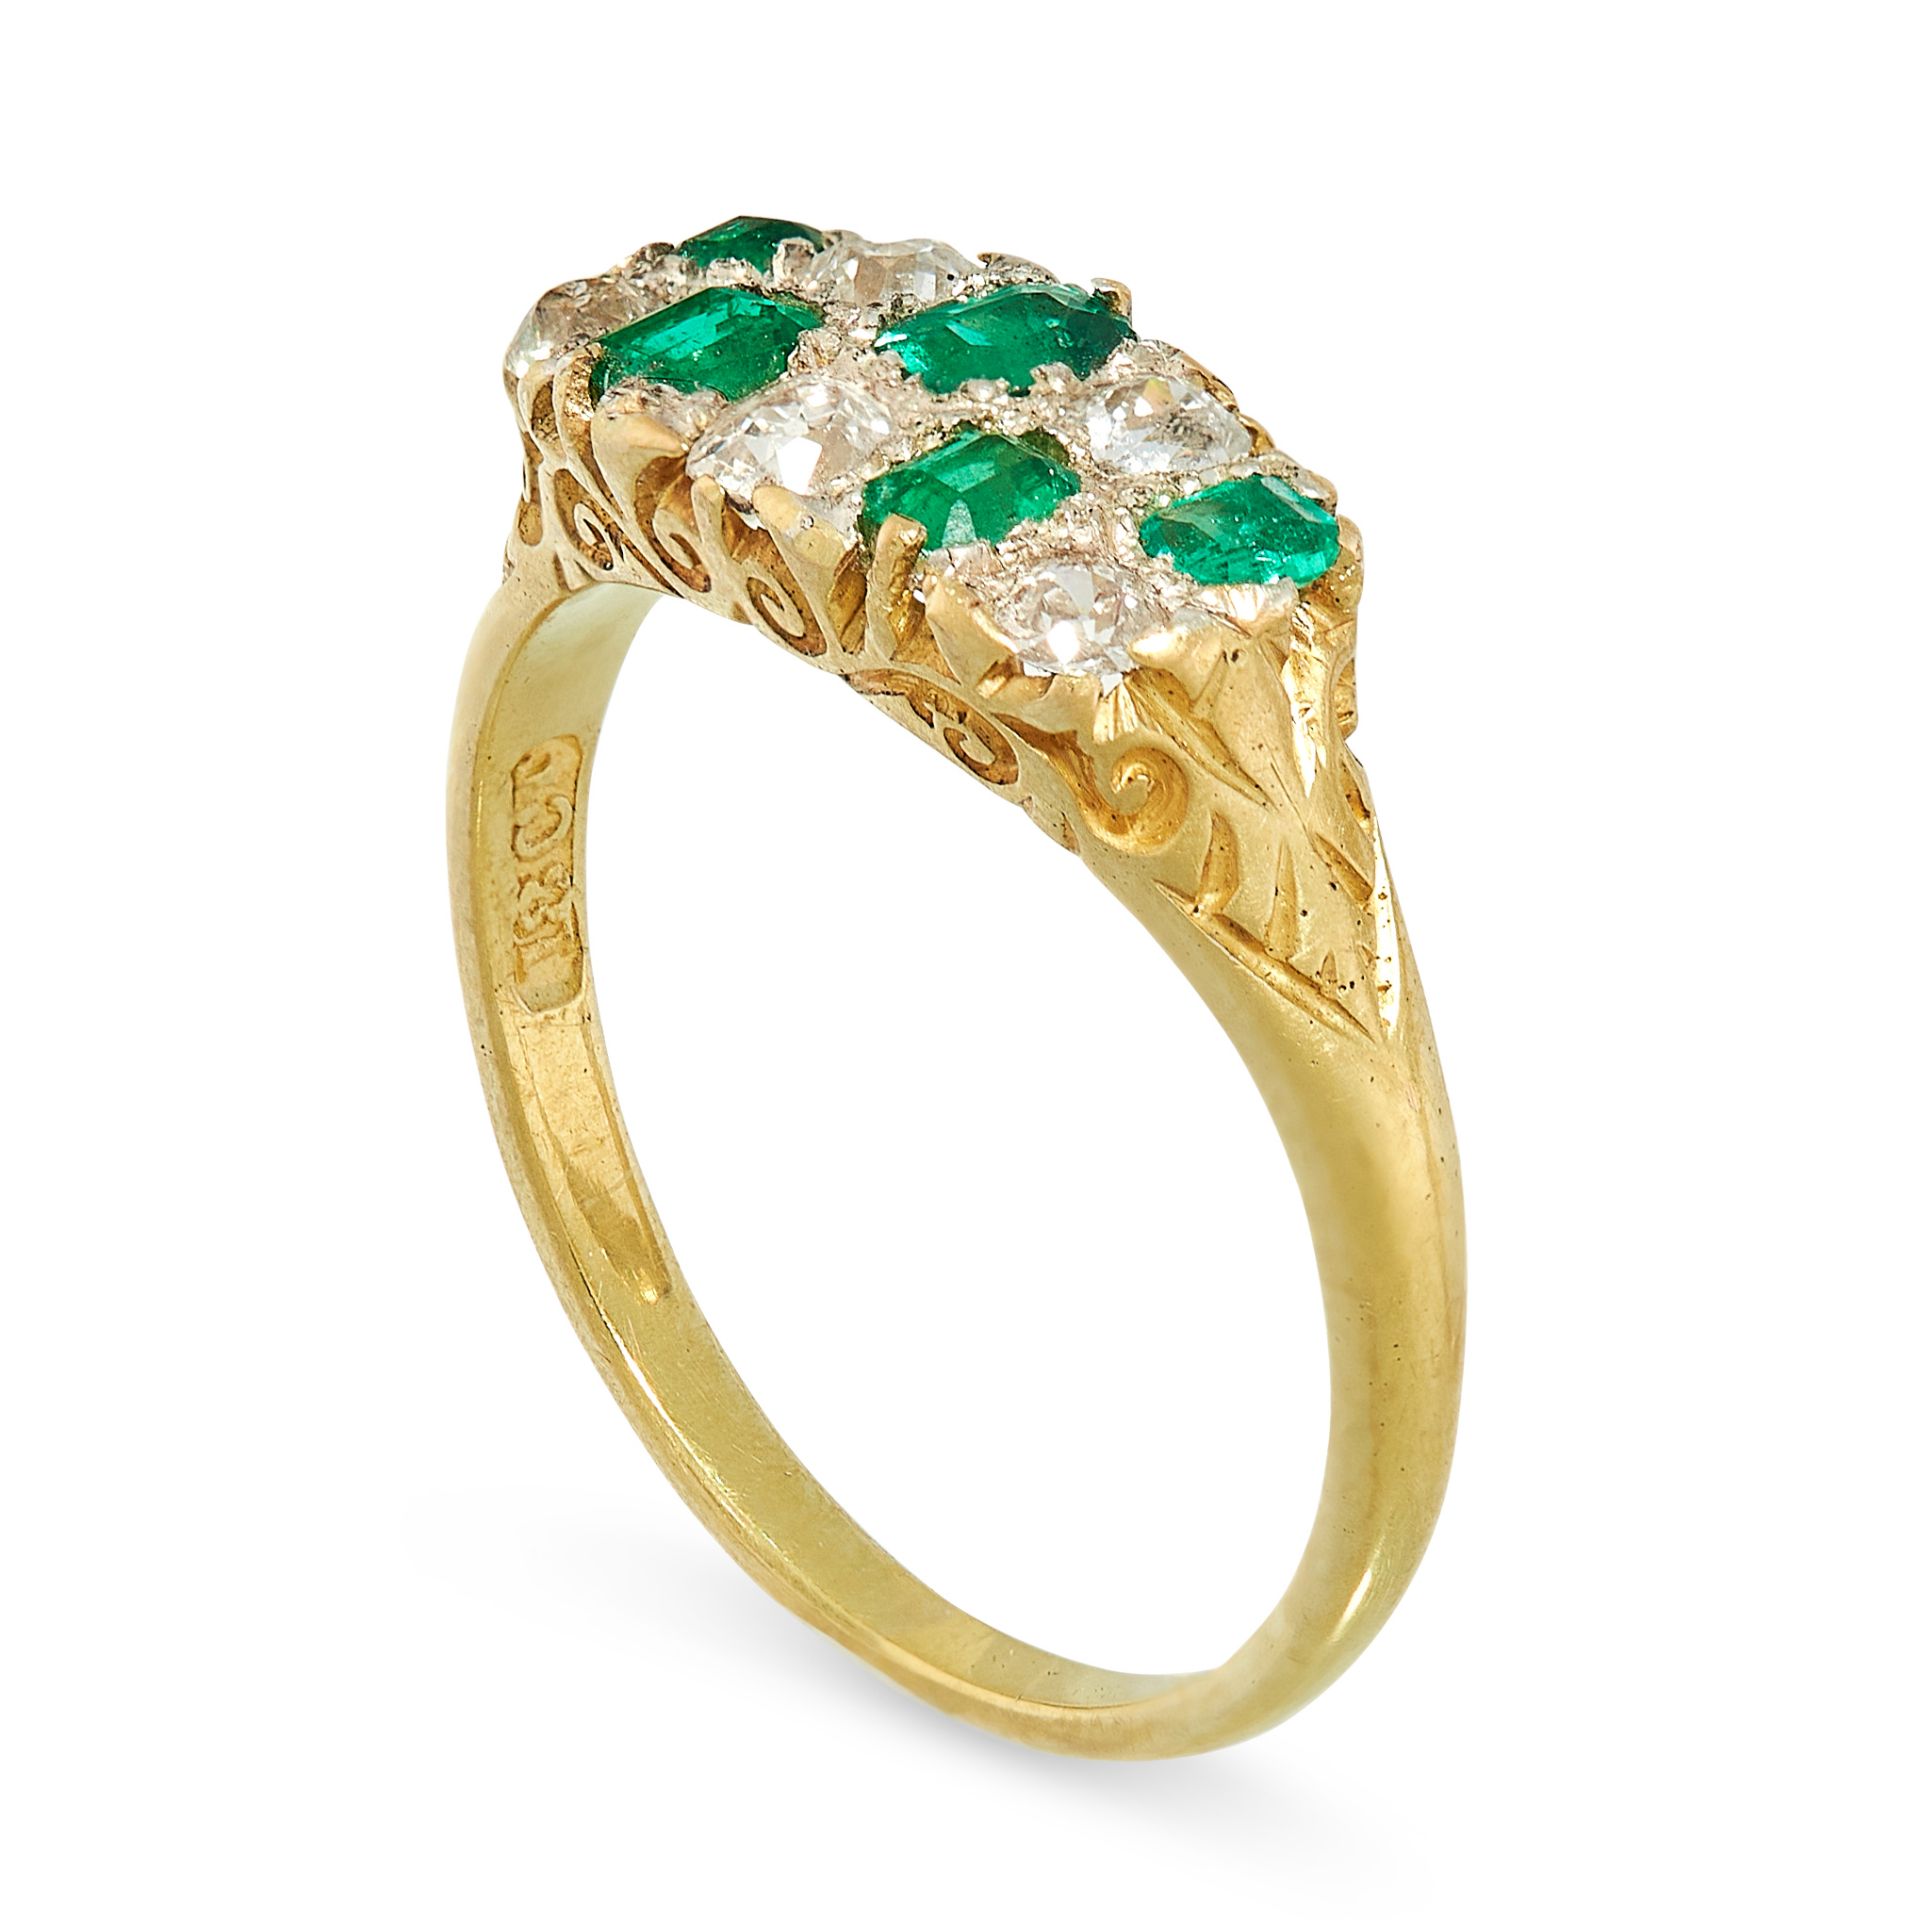 ANTIQUE EMERALD AND DIAMOND RING in 18ct yellow gold, the face set alternately with emerald cut - Image 2 of 2